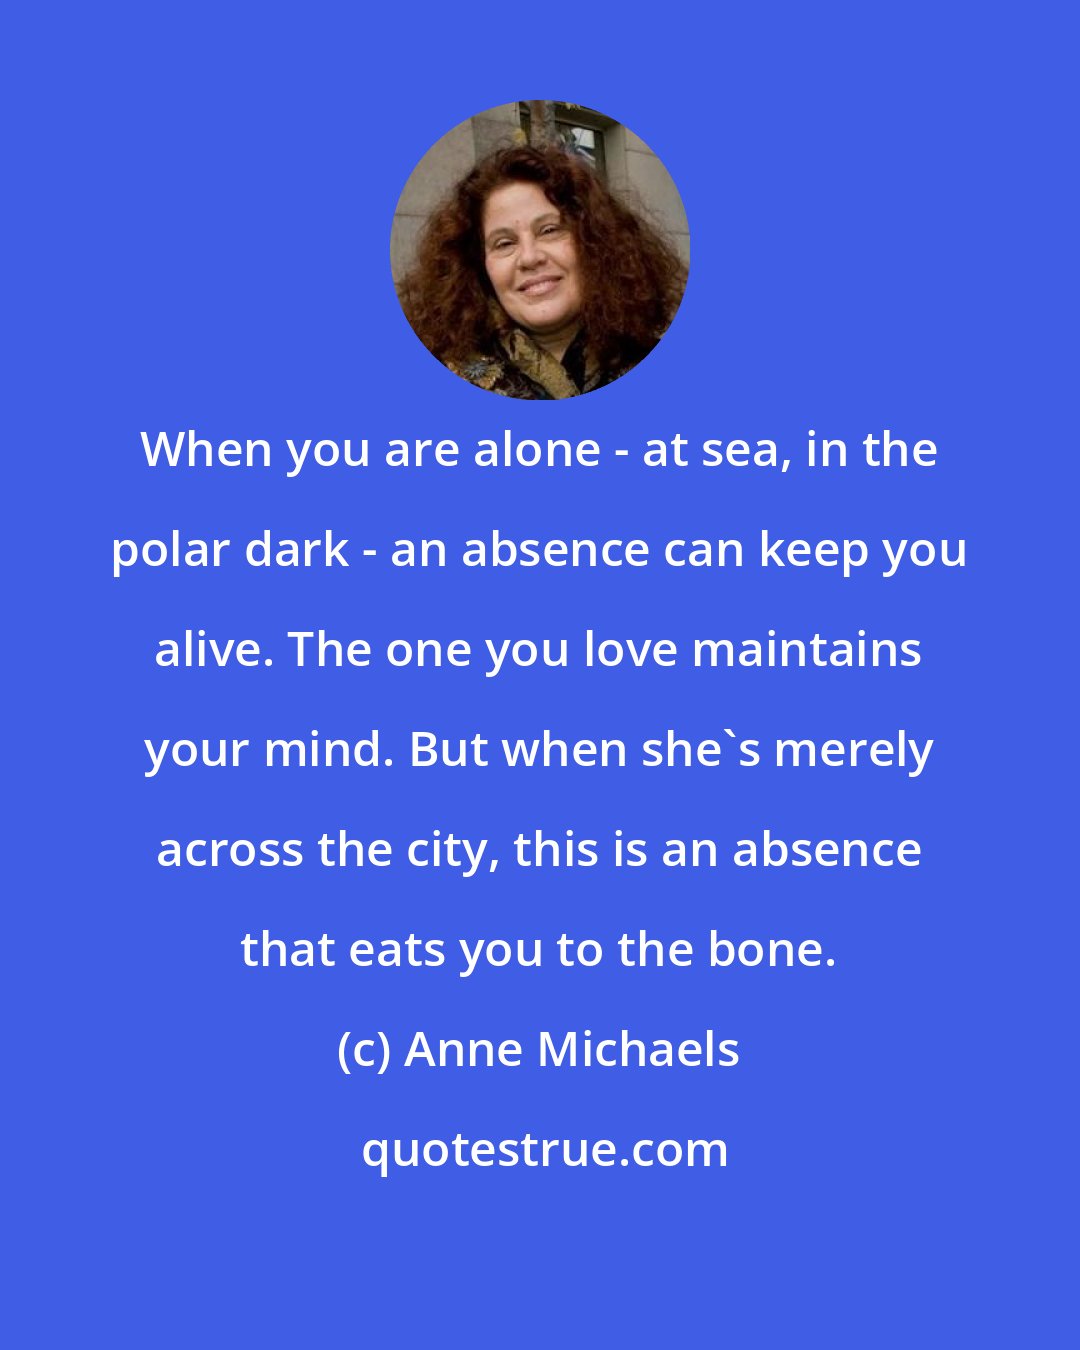 Anne Michaels: When you are alone - at sea, in the polar dark - an absence can keep you alive. The one you love maintains your mind. But when she's merely across the city, this is an absence that eats you to the bone.